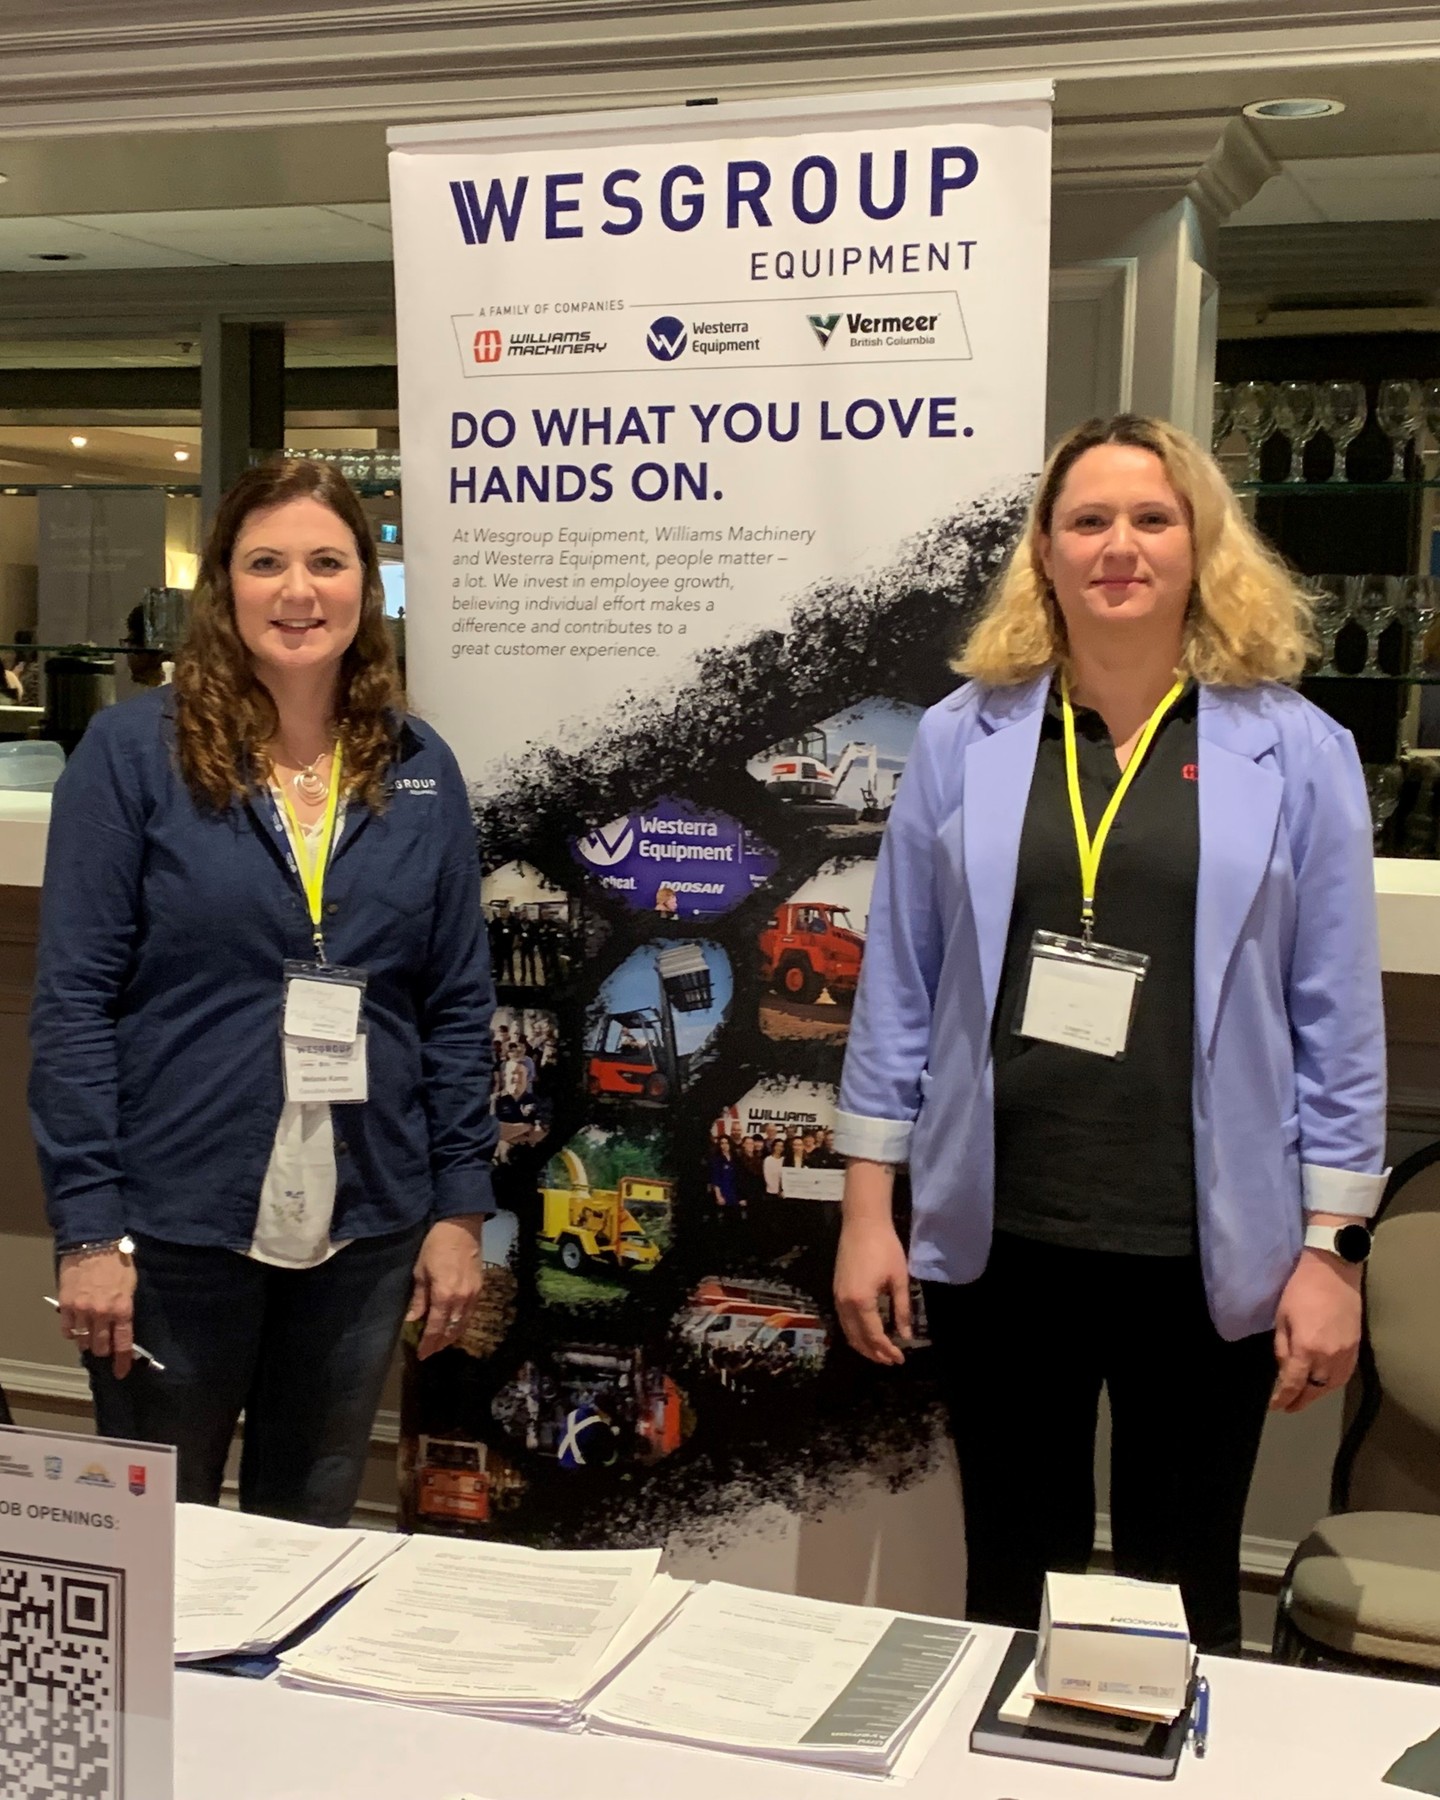 Earlier this week our team joined in on the @mosaicbc_ Job Fair! It was great meeting such a diverse pool of people and getting to know each of you 😄 Want to join our award winning company? View our current job openings at wesgroupequipment.com/careers

#wesgroupequipment #werehiring